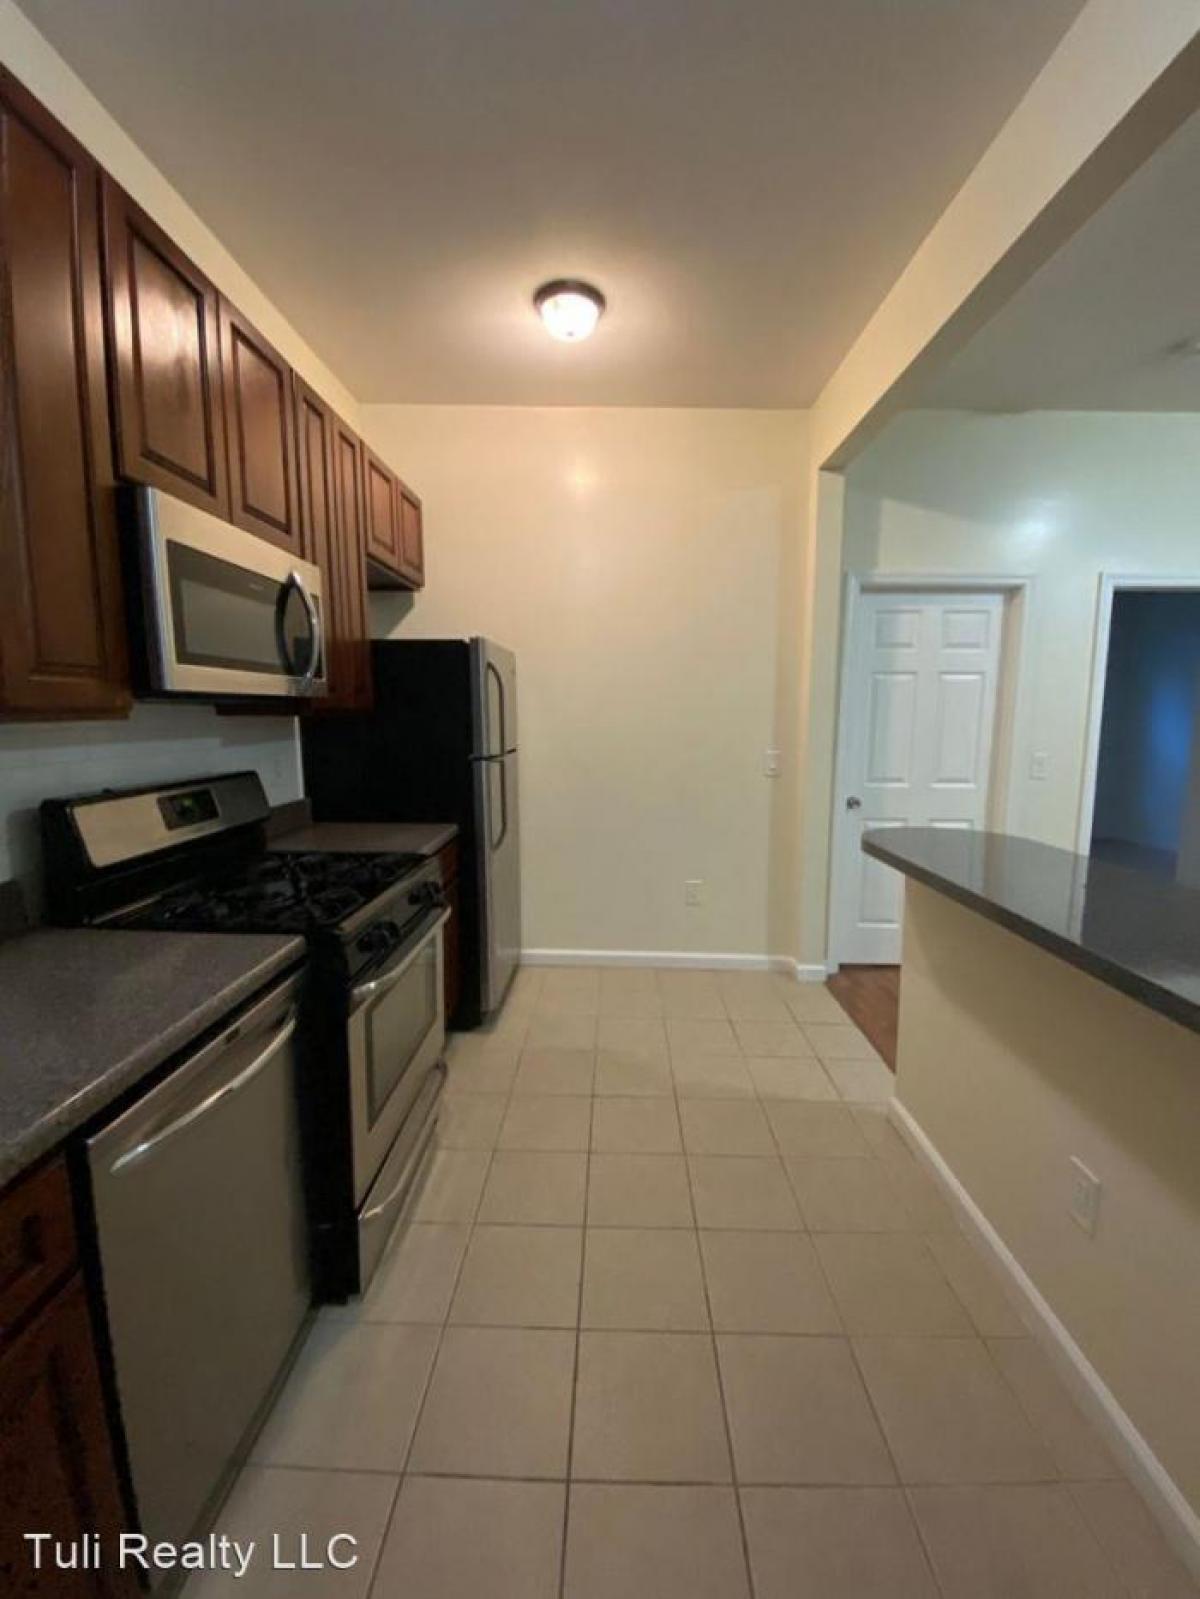 Picture of Apartment For Rent in Weehawken, New Jersey, United States